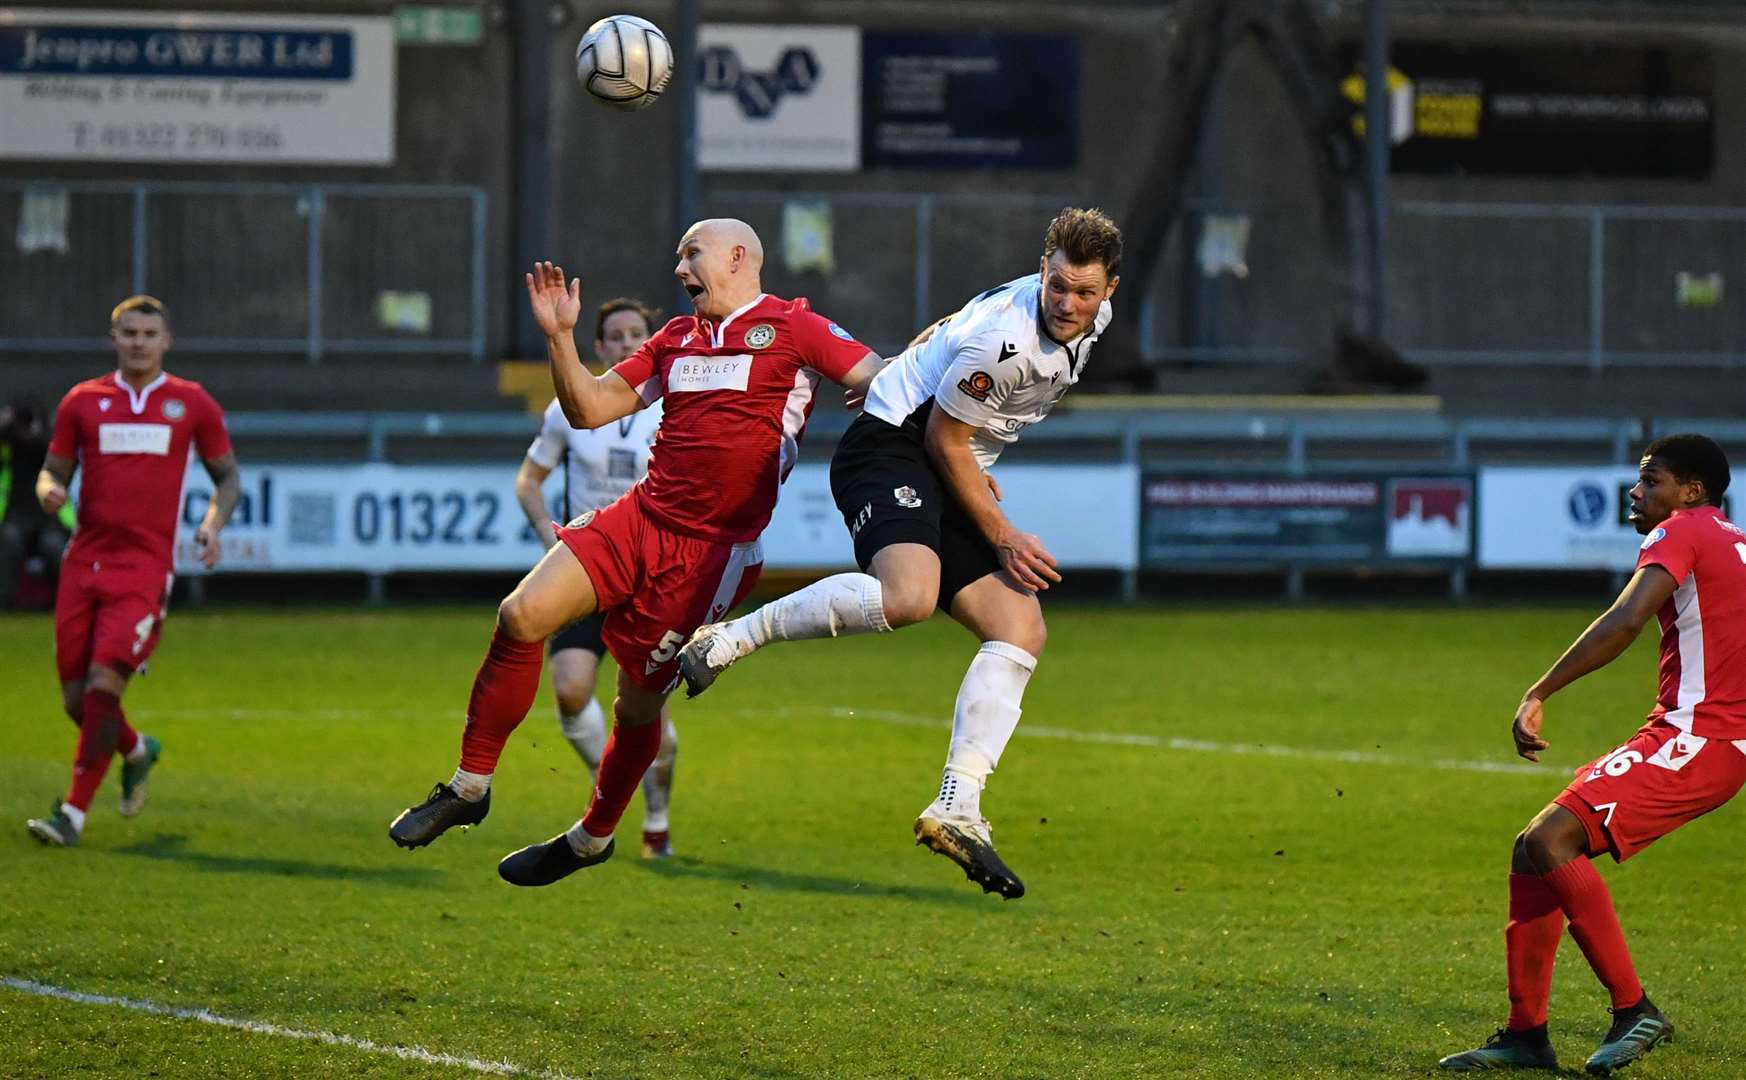 Josh Hill scored for Dartford against Hungerford on Saturday. Picture: Keith Gillard